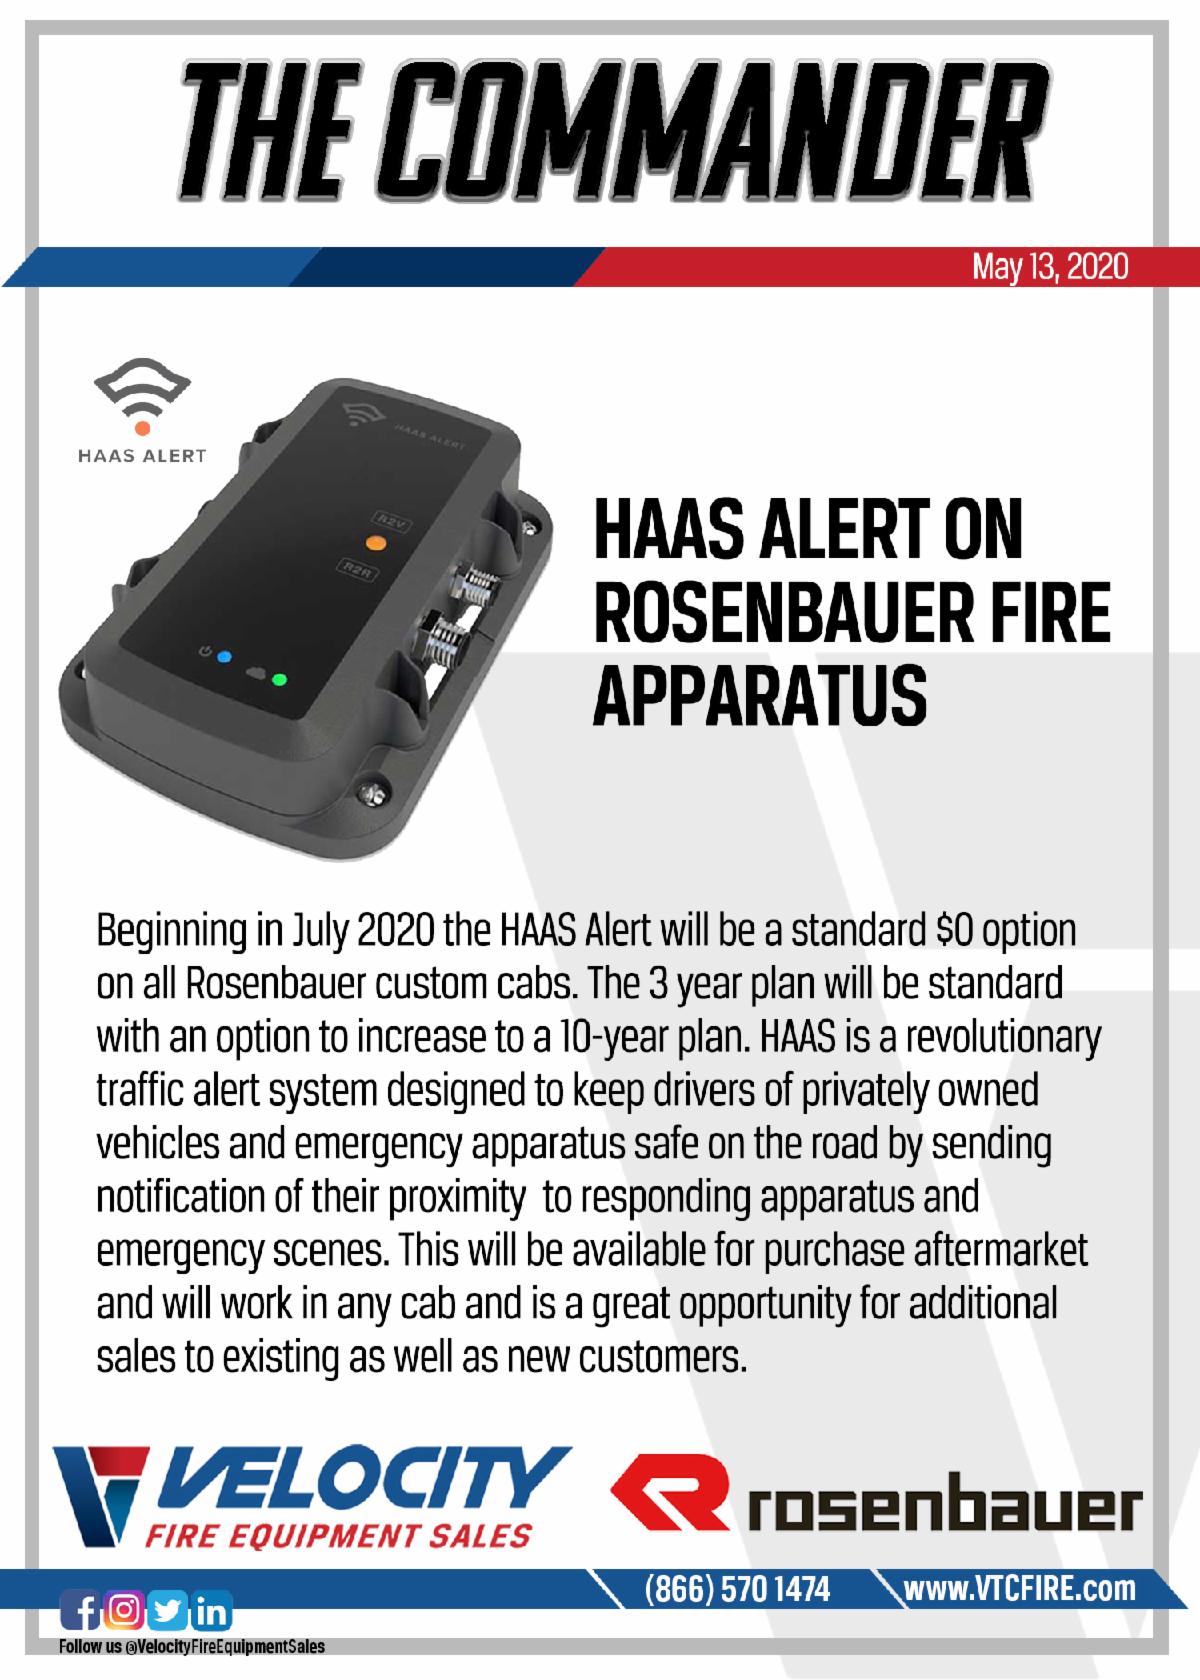 The Commander - May 13th HAAS alert on Rosenbauer Fire Apparatus